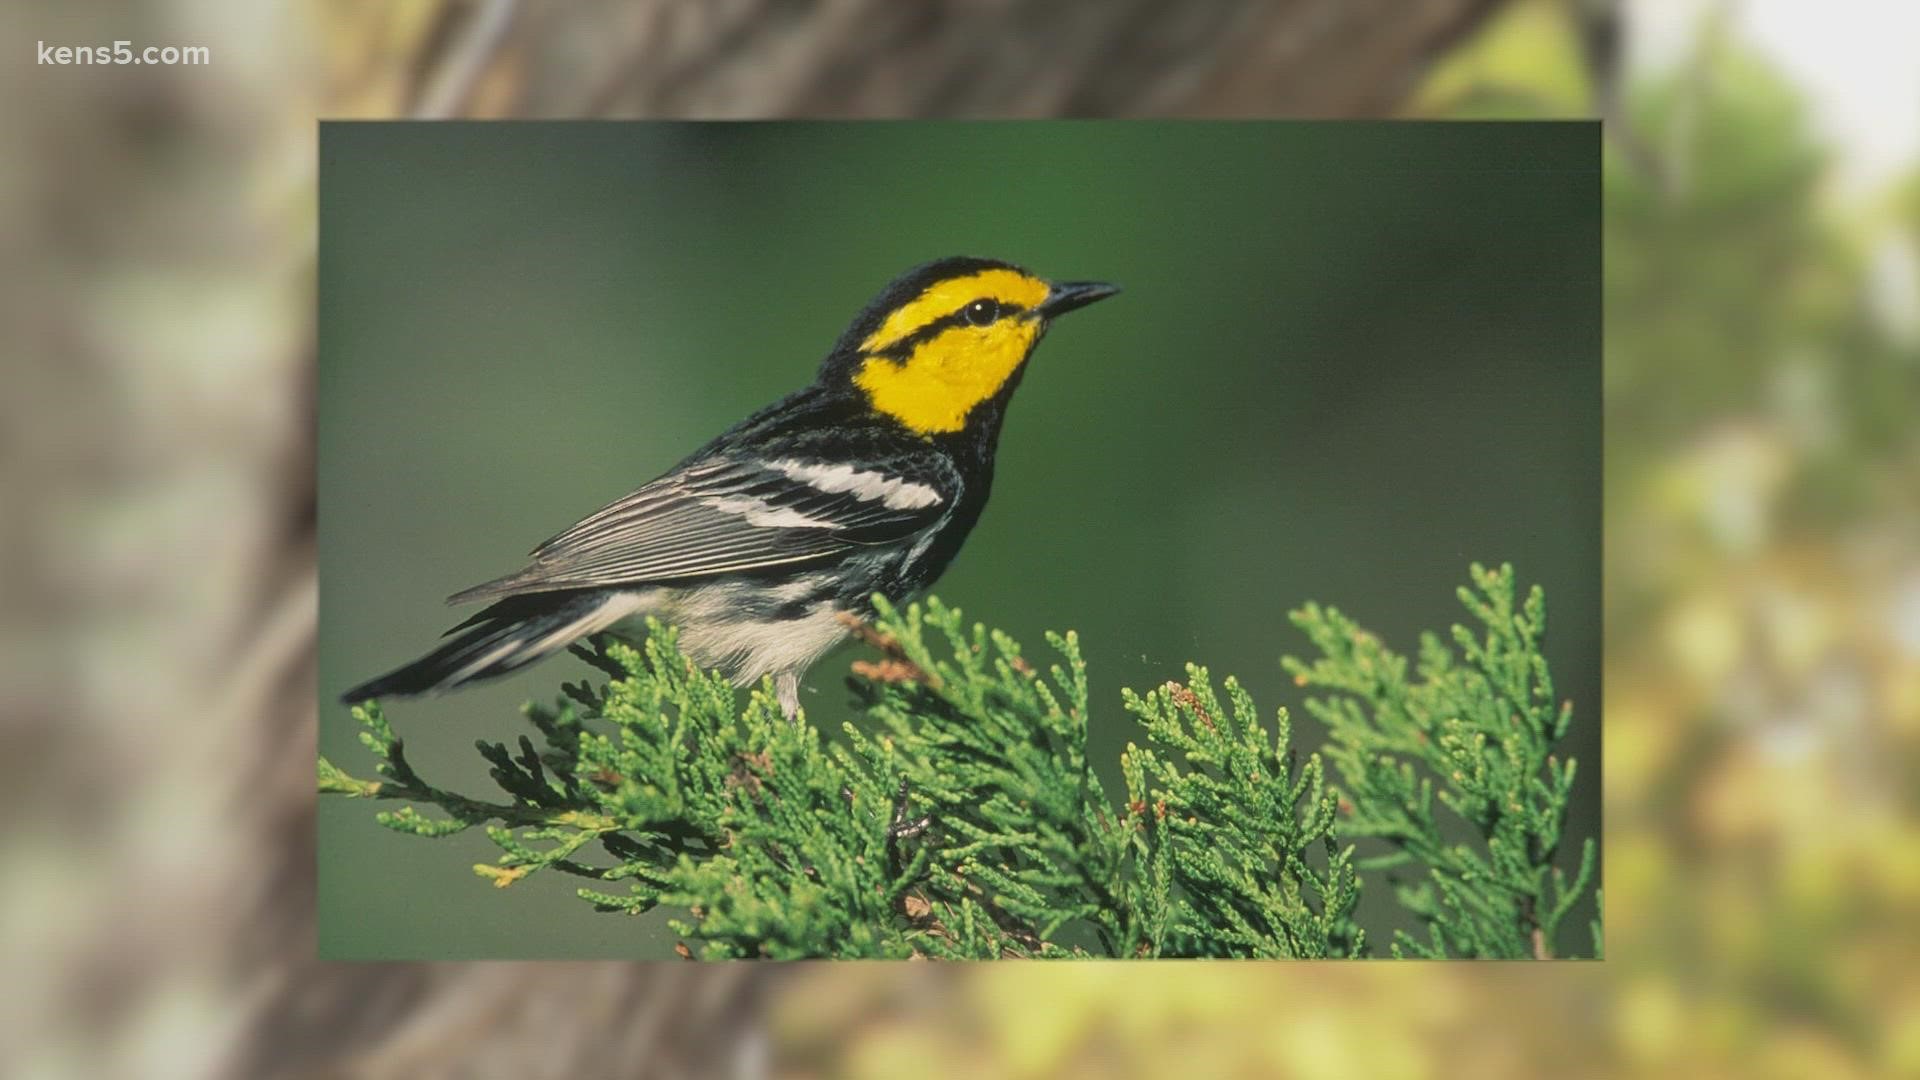 The Texas General Land Office contends the Golden Cheeked Warbler does not belong on the endangered species list.